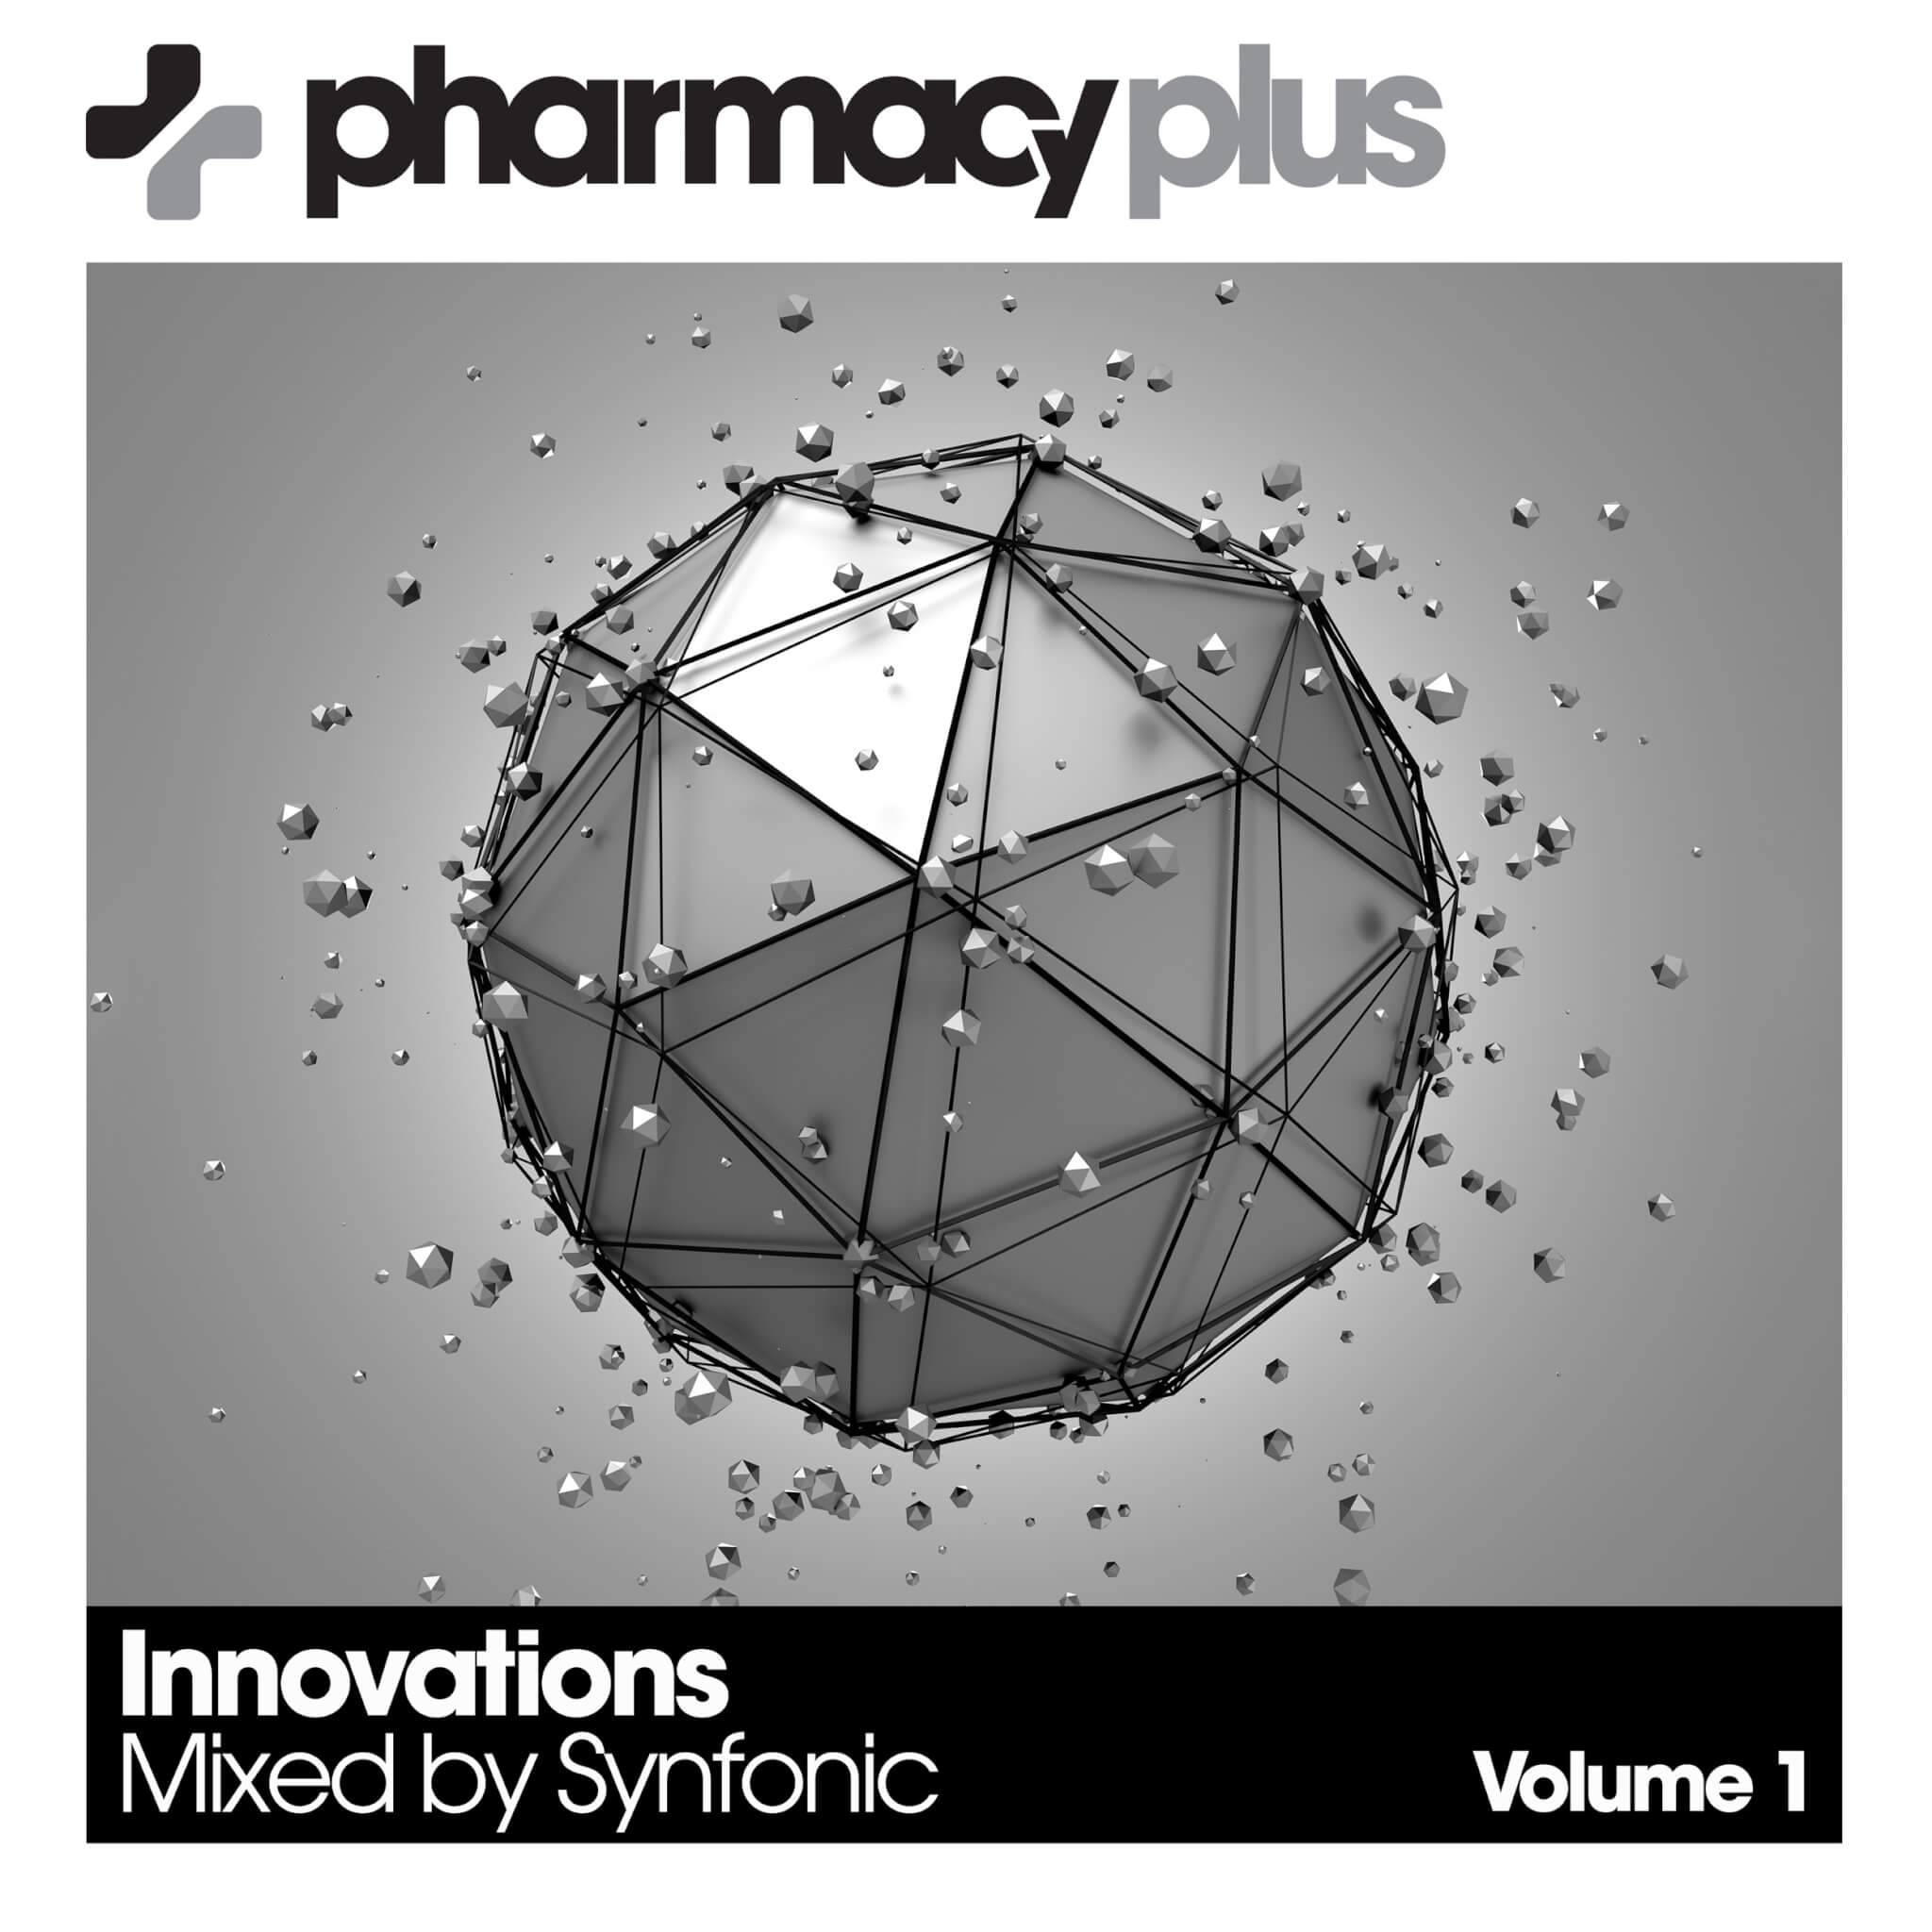 Pharmacy Plus launches new Innovations Compilation Series volume 1 mixed by Synfonic